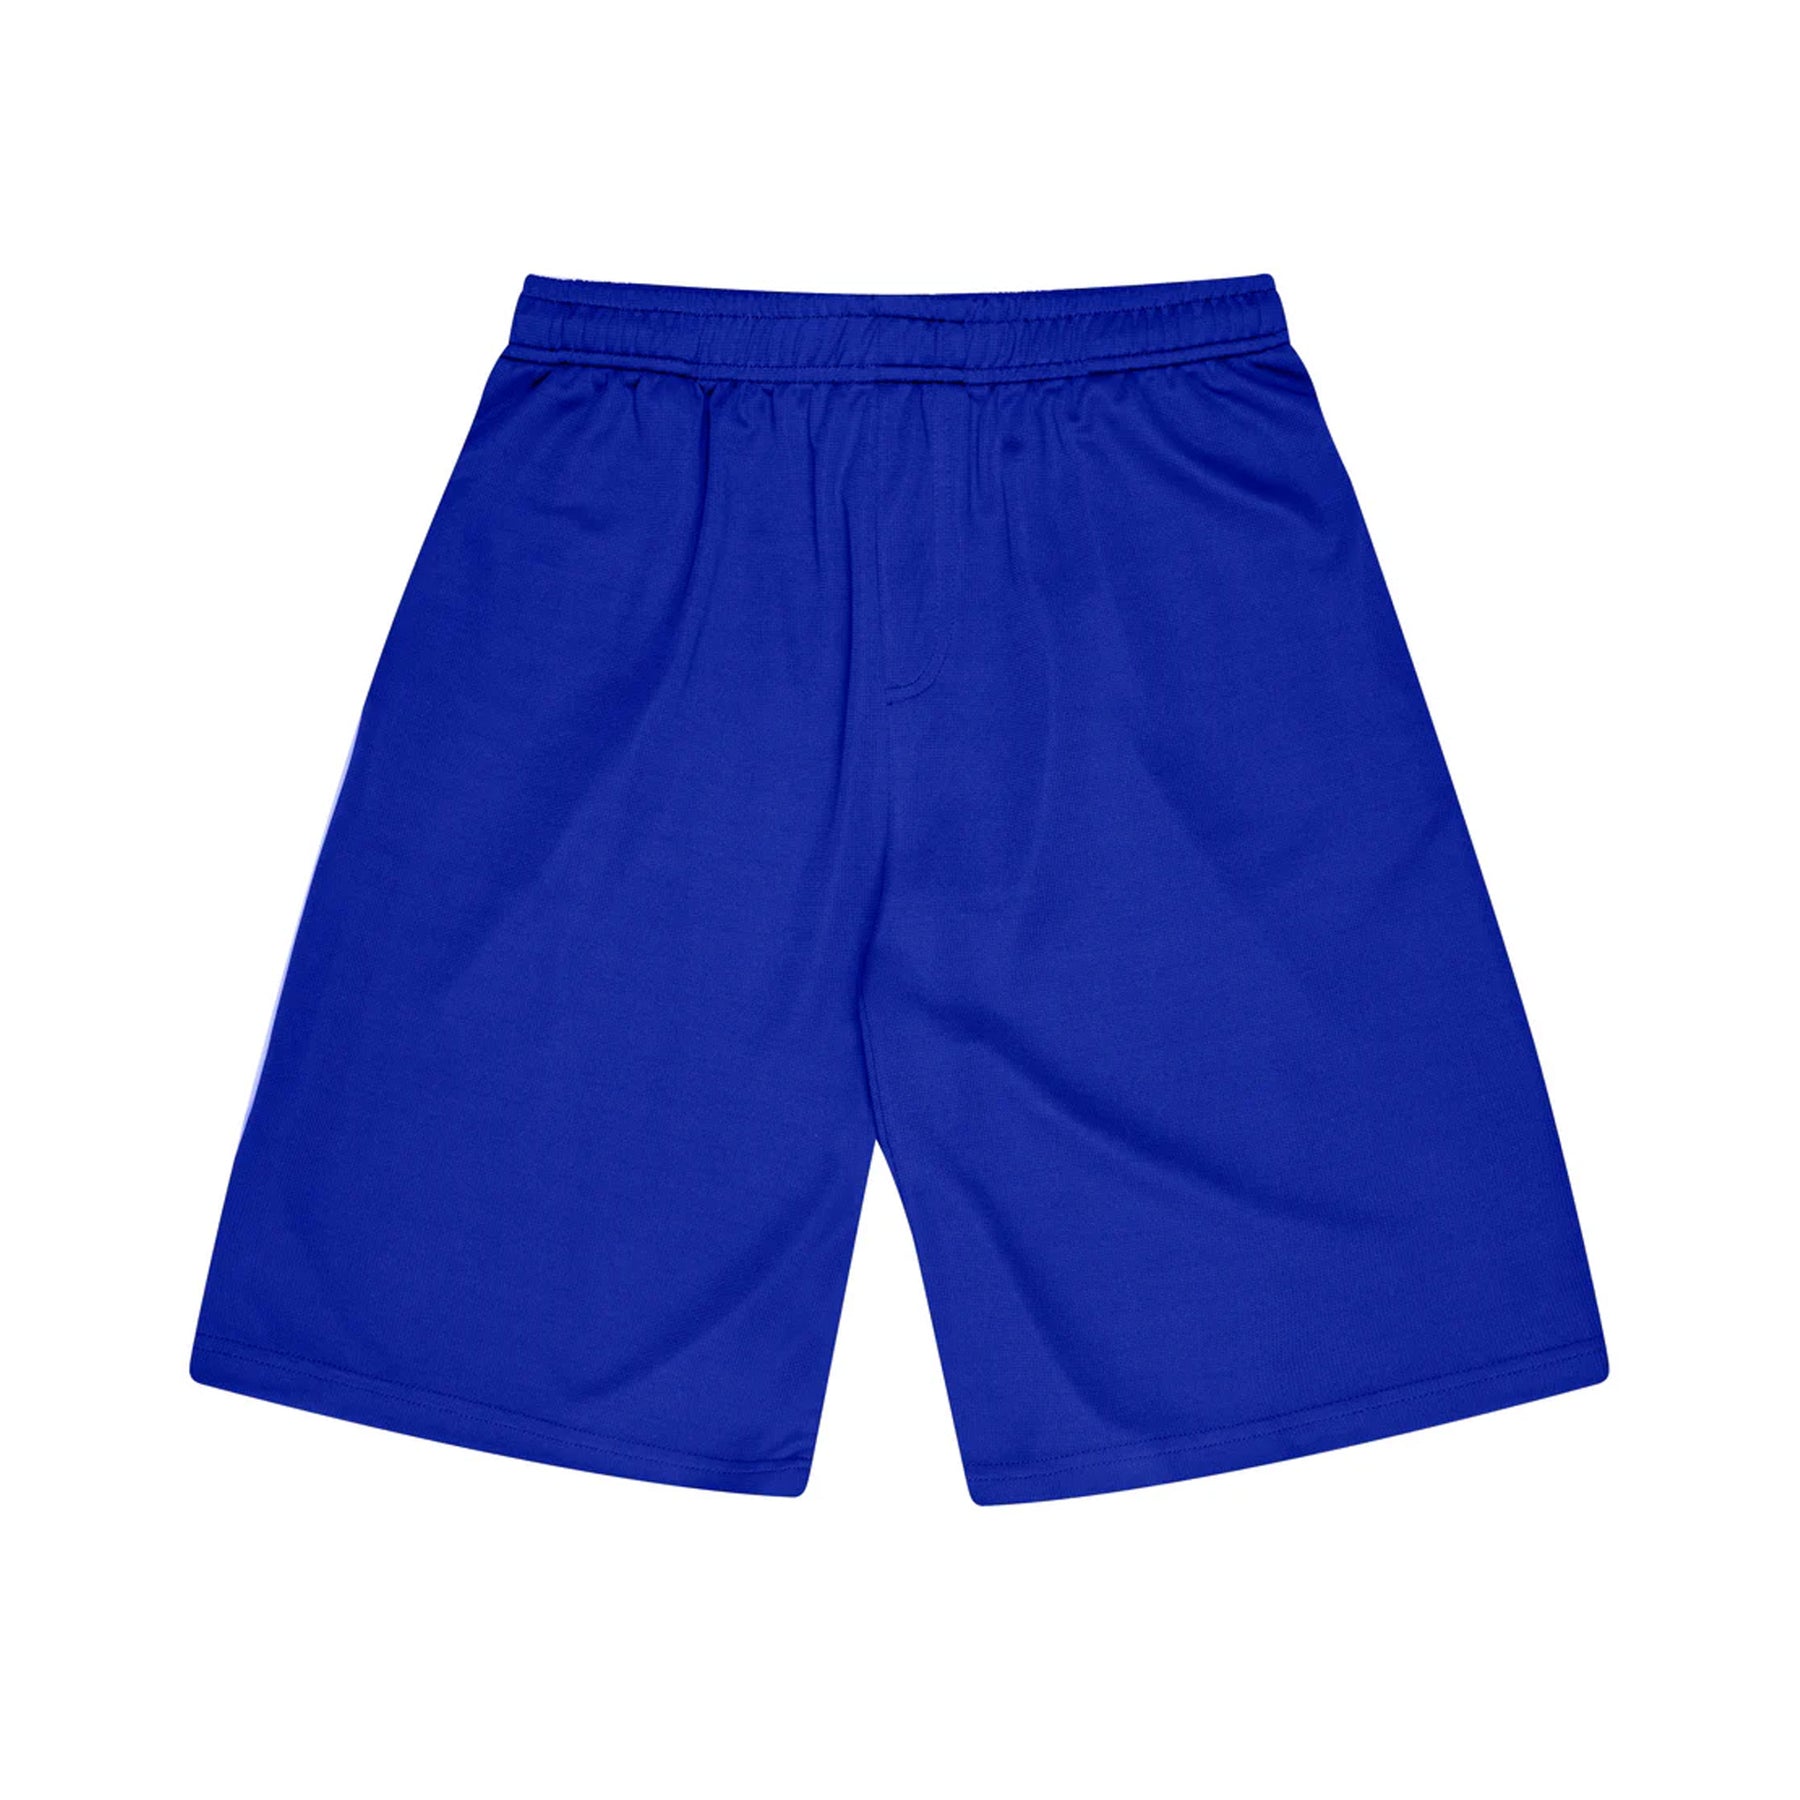 aussie pacific sport kids shorts in royal